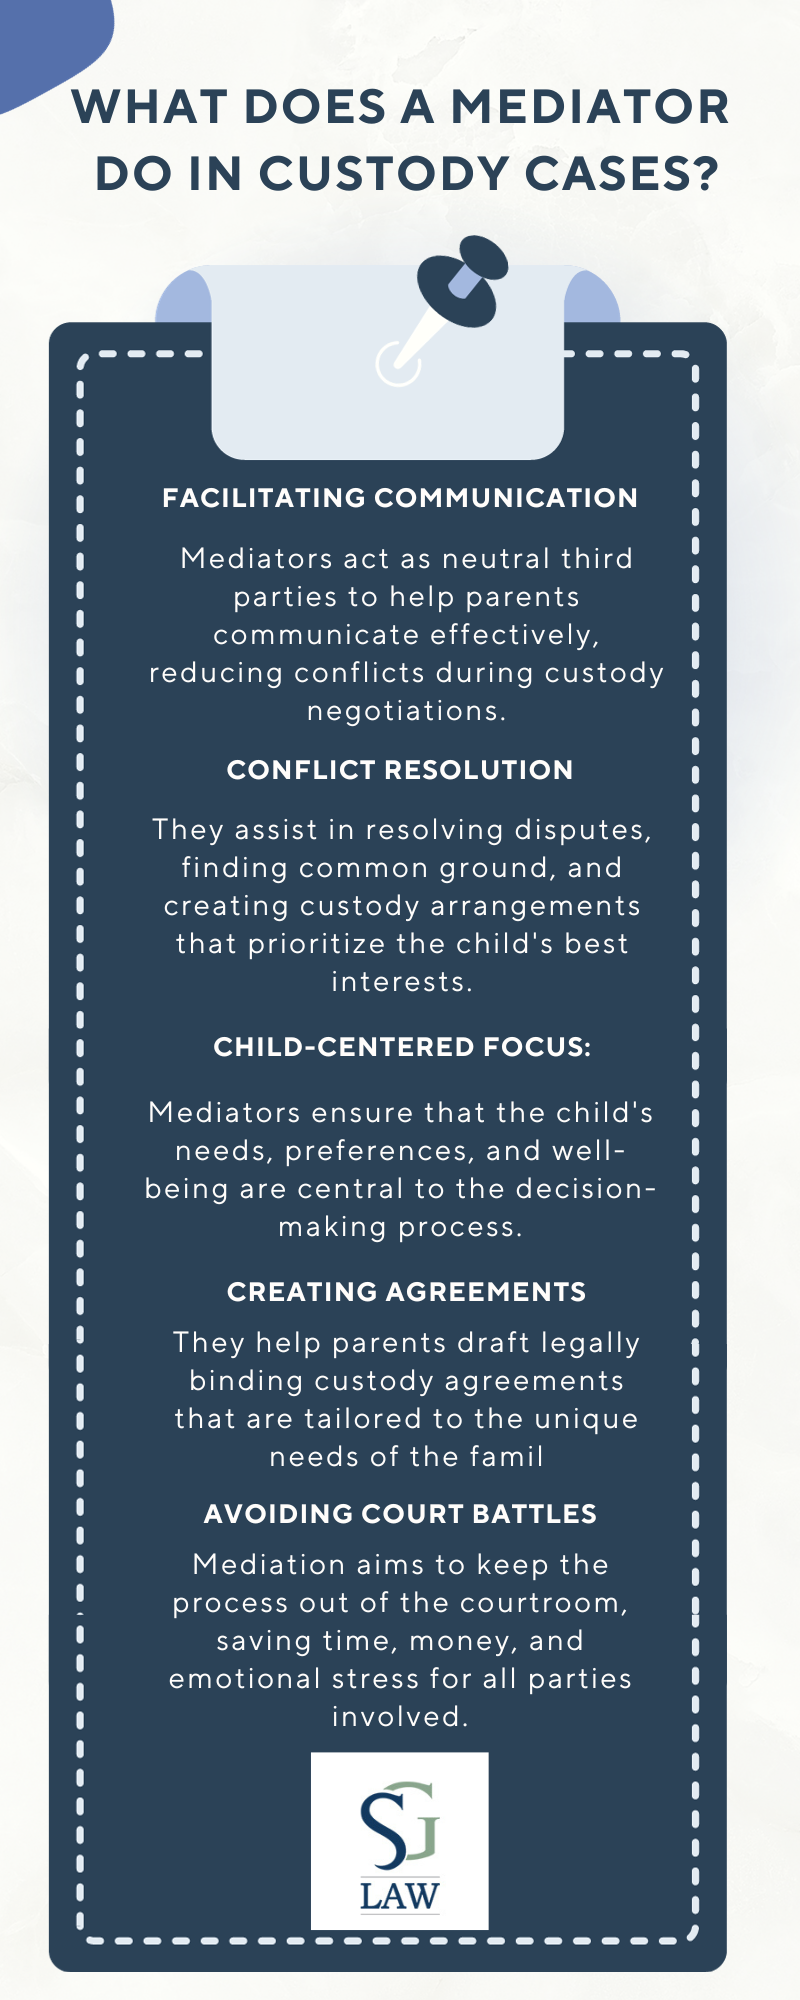 infographic showing a mediator's role in custody cases